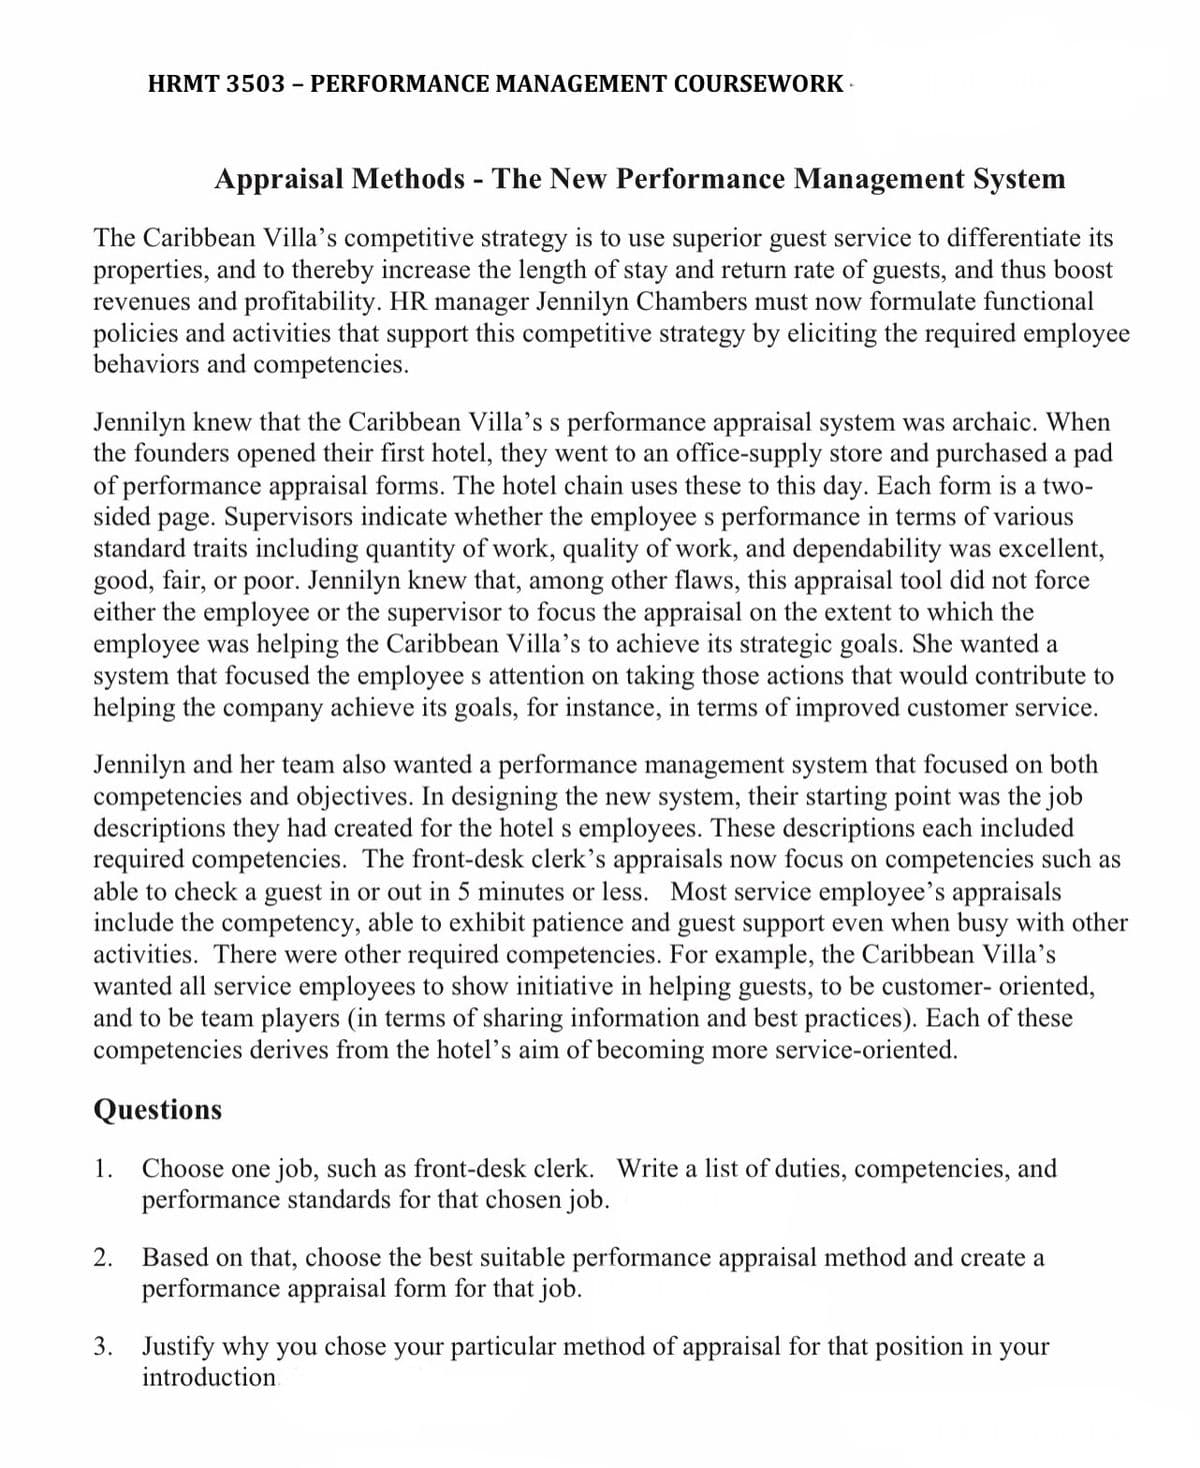 Appraisal Methods - The New Performance Management System
The Caribbean Villa's competitive strategy is to use superior guest service to differentiate its
properties, and to thereby increase the length of stay and return rate of guests, and thus boost
revenues and profitability. HR manager Jennilyn Chambers must now formulate functional
policies and activities that support this competitive strategy by eliciting the required employee
behaviors and competencies.
HRMT 3503 - PERFORMANCE MANAGEMENT COURSEWORK.
Jennilyn knew that the Caribbean Villa's s performance appraisal system was archaic. When
the founders opened their first hotel, they went to an office-supply store and purchased a pad
of performance appraisal forms. The hotel chain uses these to this day. Each form is a two-
sided page. Supervisors indicate whether the employee s performance in terms of various
standard traits including quantity of work, quality of work, and dependability was excellent,
good, fair, or poor. Jennilyn knew that, among other flaws, this appraisal tool did not force
either the employee or the supervisor to focus the appraisal on the extent to which the
employee was helping the Caribbean Villa's to achieve its strategic goals. She wanted a
system that focused the employees attention on taking those actions that would contribute to
helping the company achieve its goals, for instance, in terms of improved customer service.
Jennilyn and her team also wanted a performance management system that focused on both
competencies and objectives. In designing the new system, their starting point was the job
descriptions they had created for the hotel s employees. These descriptions each included
required competencies. The front-desk clerk's appraisals now focus on competencies such as
able to check a guest in or out in 5 minutes or less. Most service employee's appraisals
include the competency, able to exhibit patience and guest support even when busy with other
activities. There were other required competencies. For example, the Caribbean Villa's
wanted all service employees to show initiative in helping guests, to be customer-oriented,
and to be team players (in terms of sharing information and best practices). Each of these
competencies derives from the hotel's aim of becoming more service-oriented.
Questions
Choose one job, such as front-desk clerk. Write a list of duties, competencies, and
performance standards for that chosen job.
1.
2.
Based on that, choose the best suitable performance appraisal method and create a
performance appraisal form for that job.
3. Justify why you chose your particular method of appraisal for that position in your
introduction.